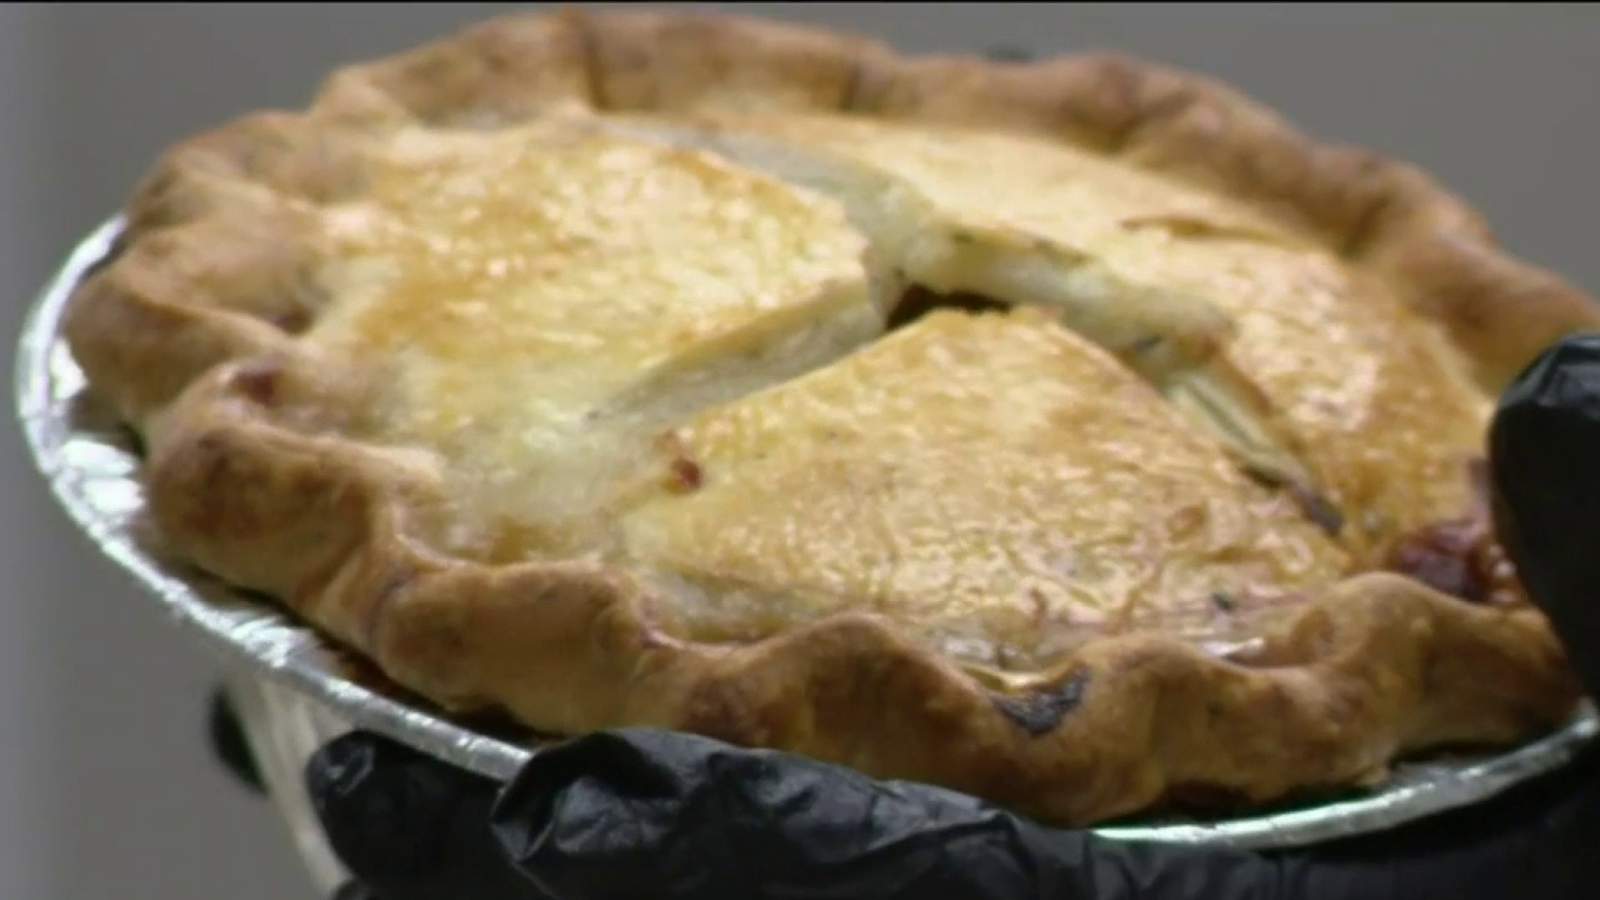 Tasty Tuesday: Great Lakes Pot Pies